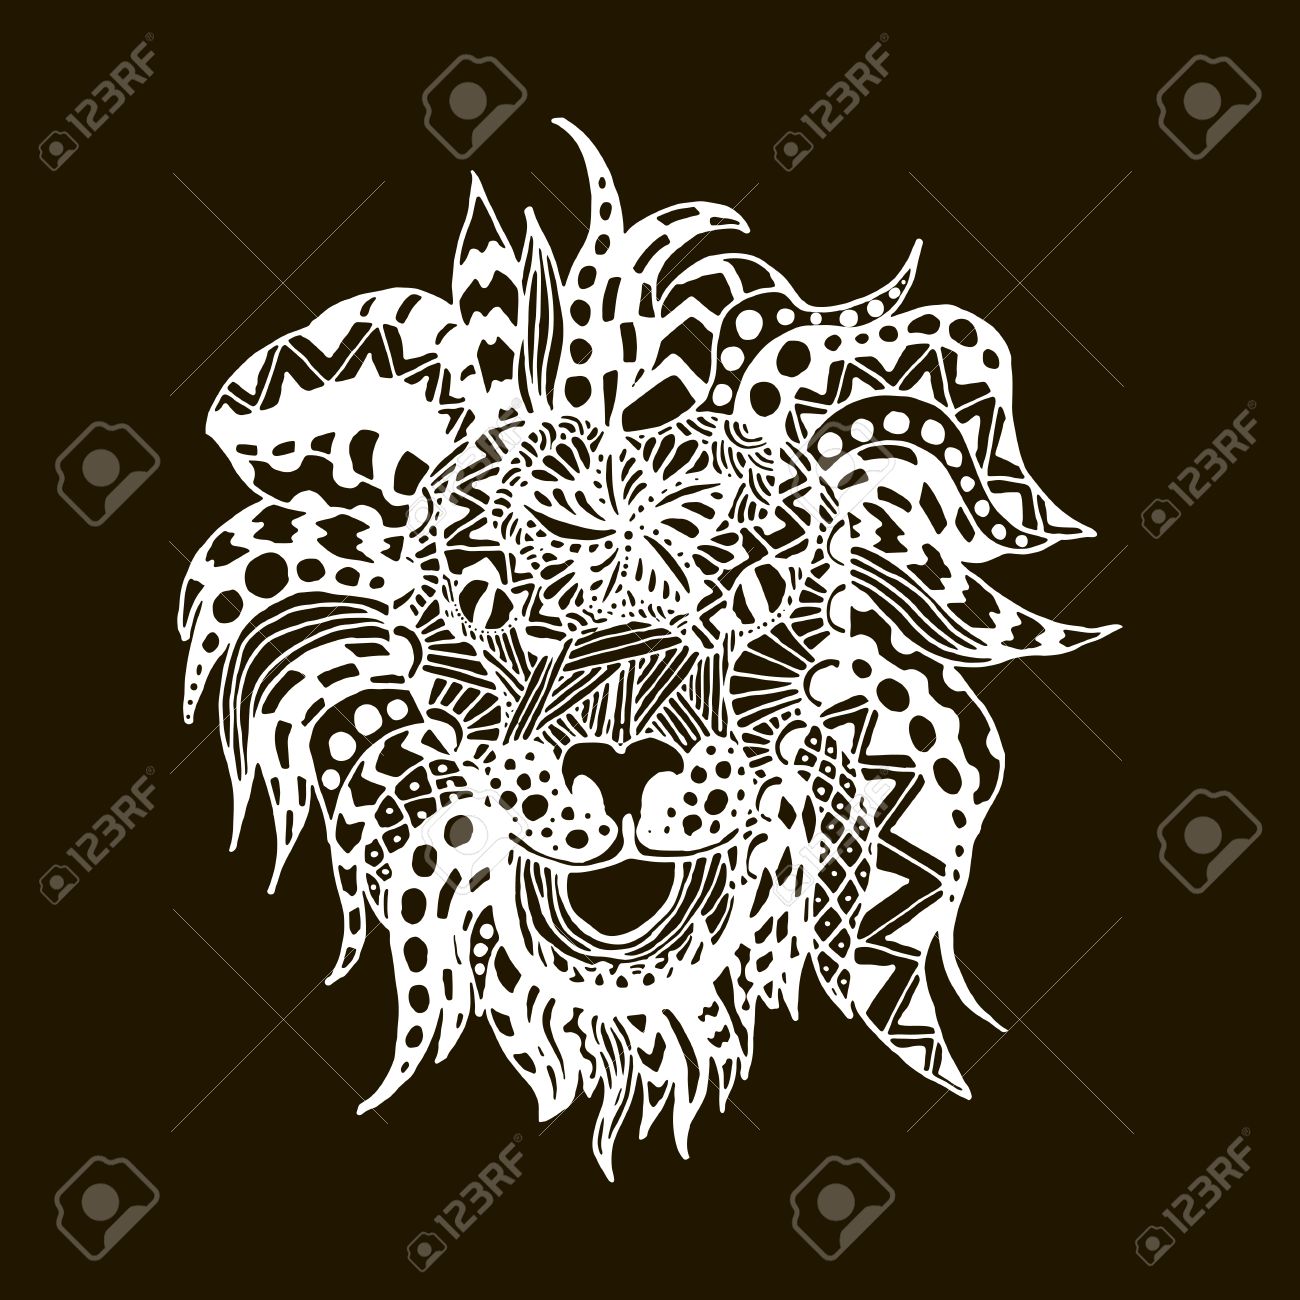 Hand Draw Lion Head Zentangle Patterns Painted In Trendy Colors